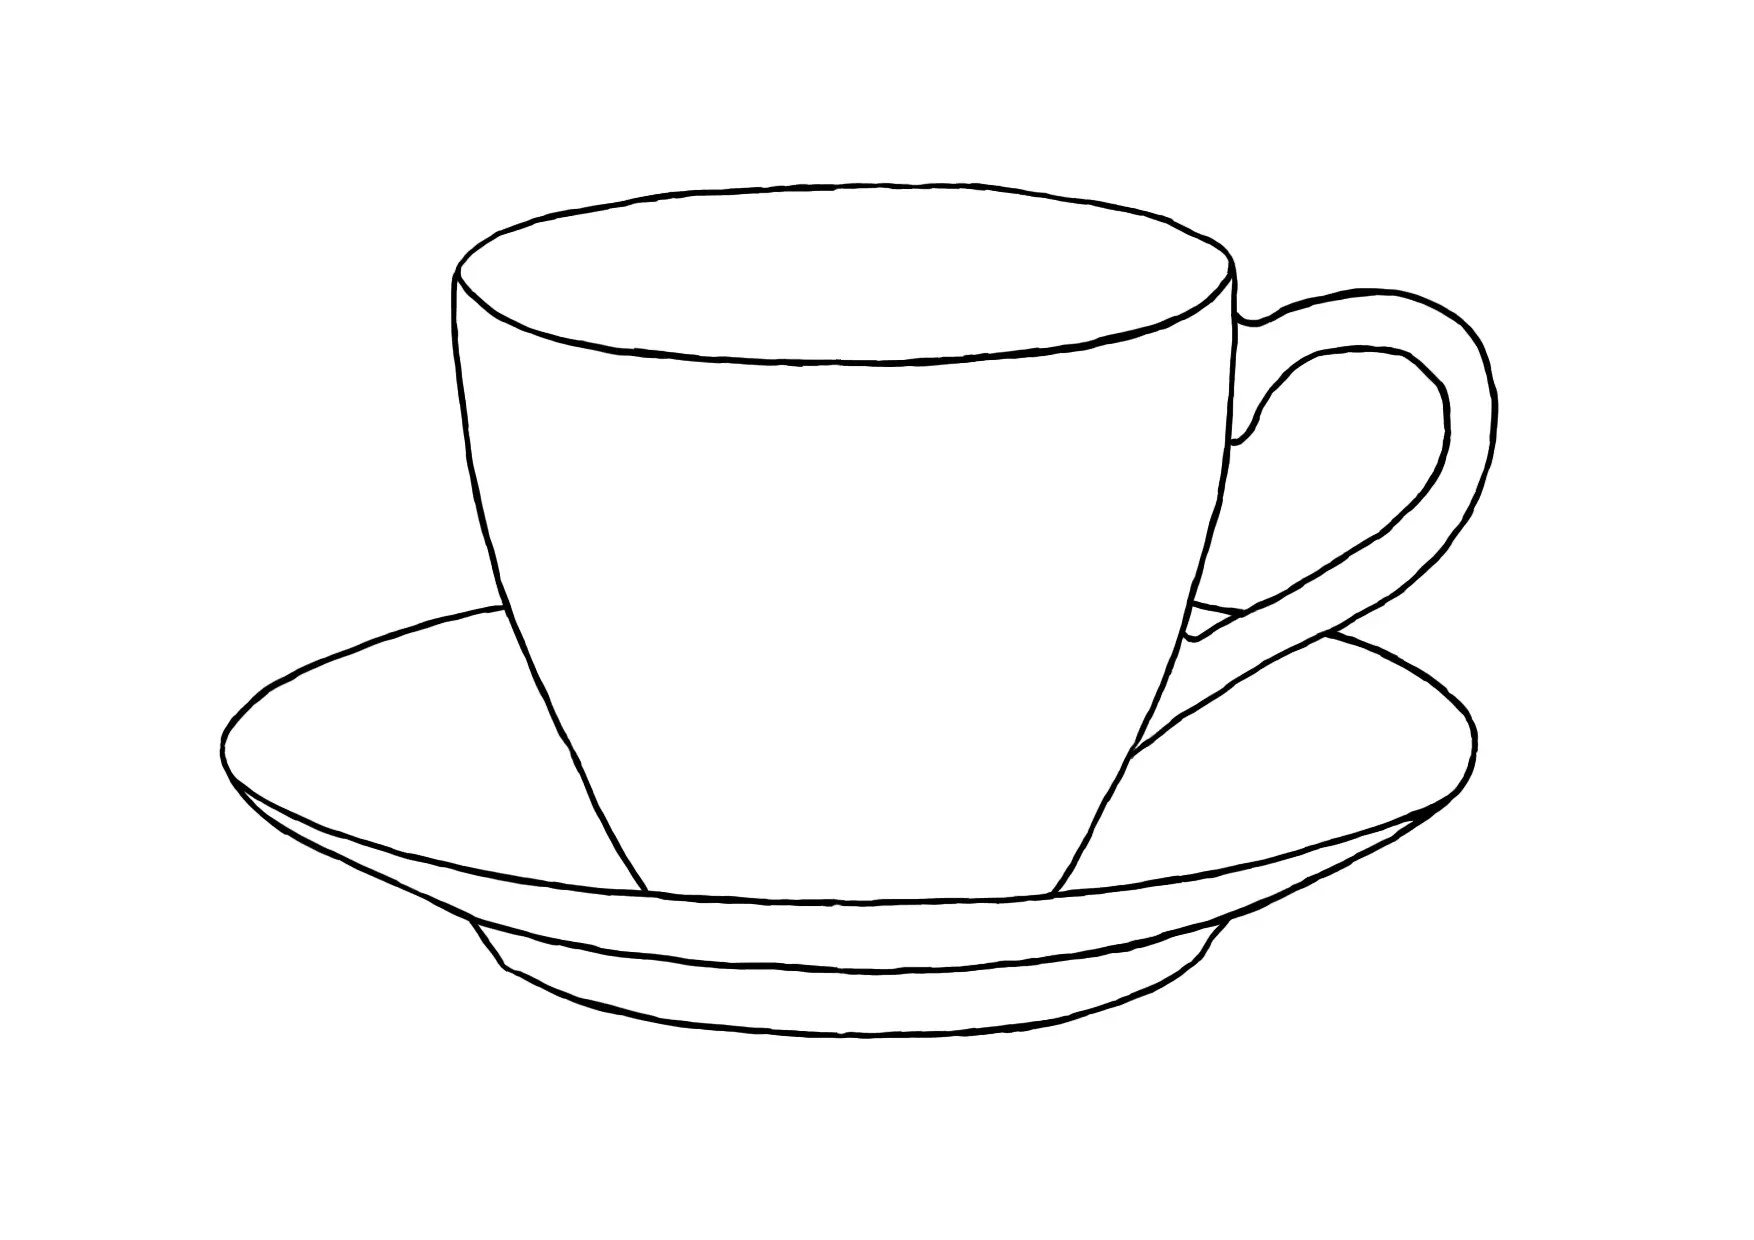 Cup pattern #1